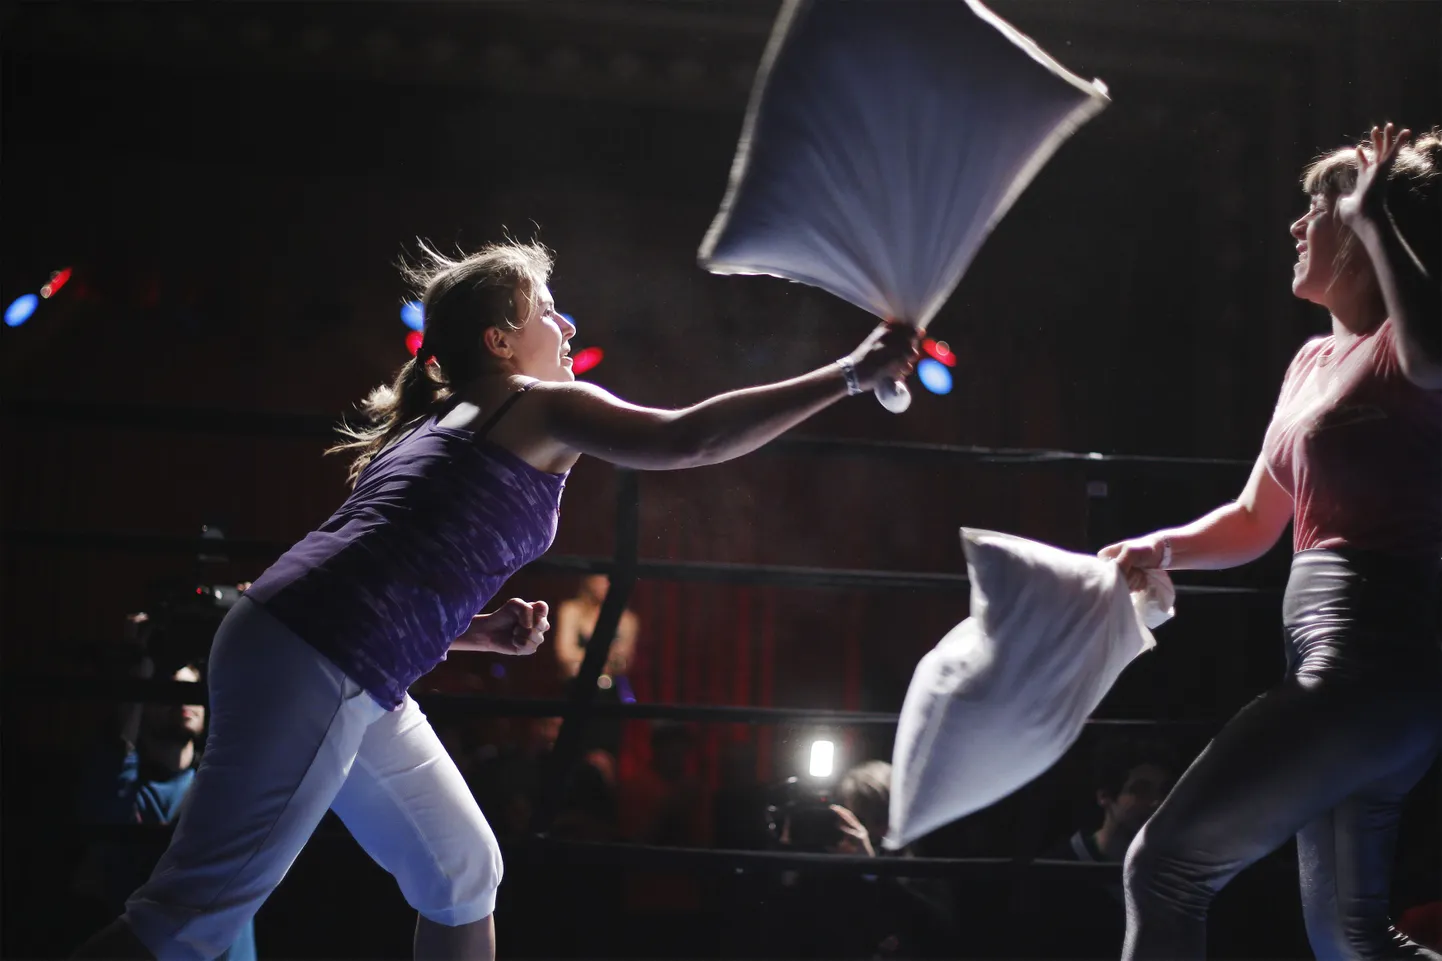 Katharina Merkle (L) of Austria hits Jen Tullock of the U.S. in the preliminary round of the first Pillow Fighting World Championships in New York May 17, 2011.  REUTERS/Lucas Jackson  (UNITED STATES - Tags: SOCIETY)